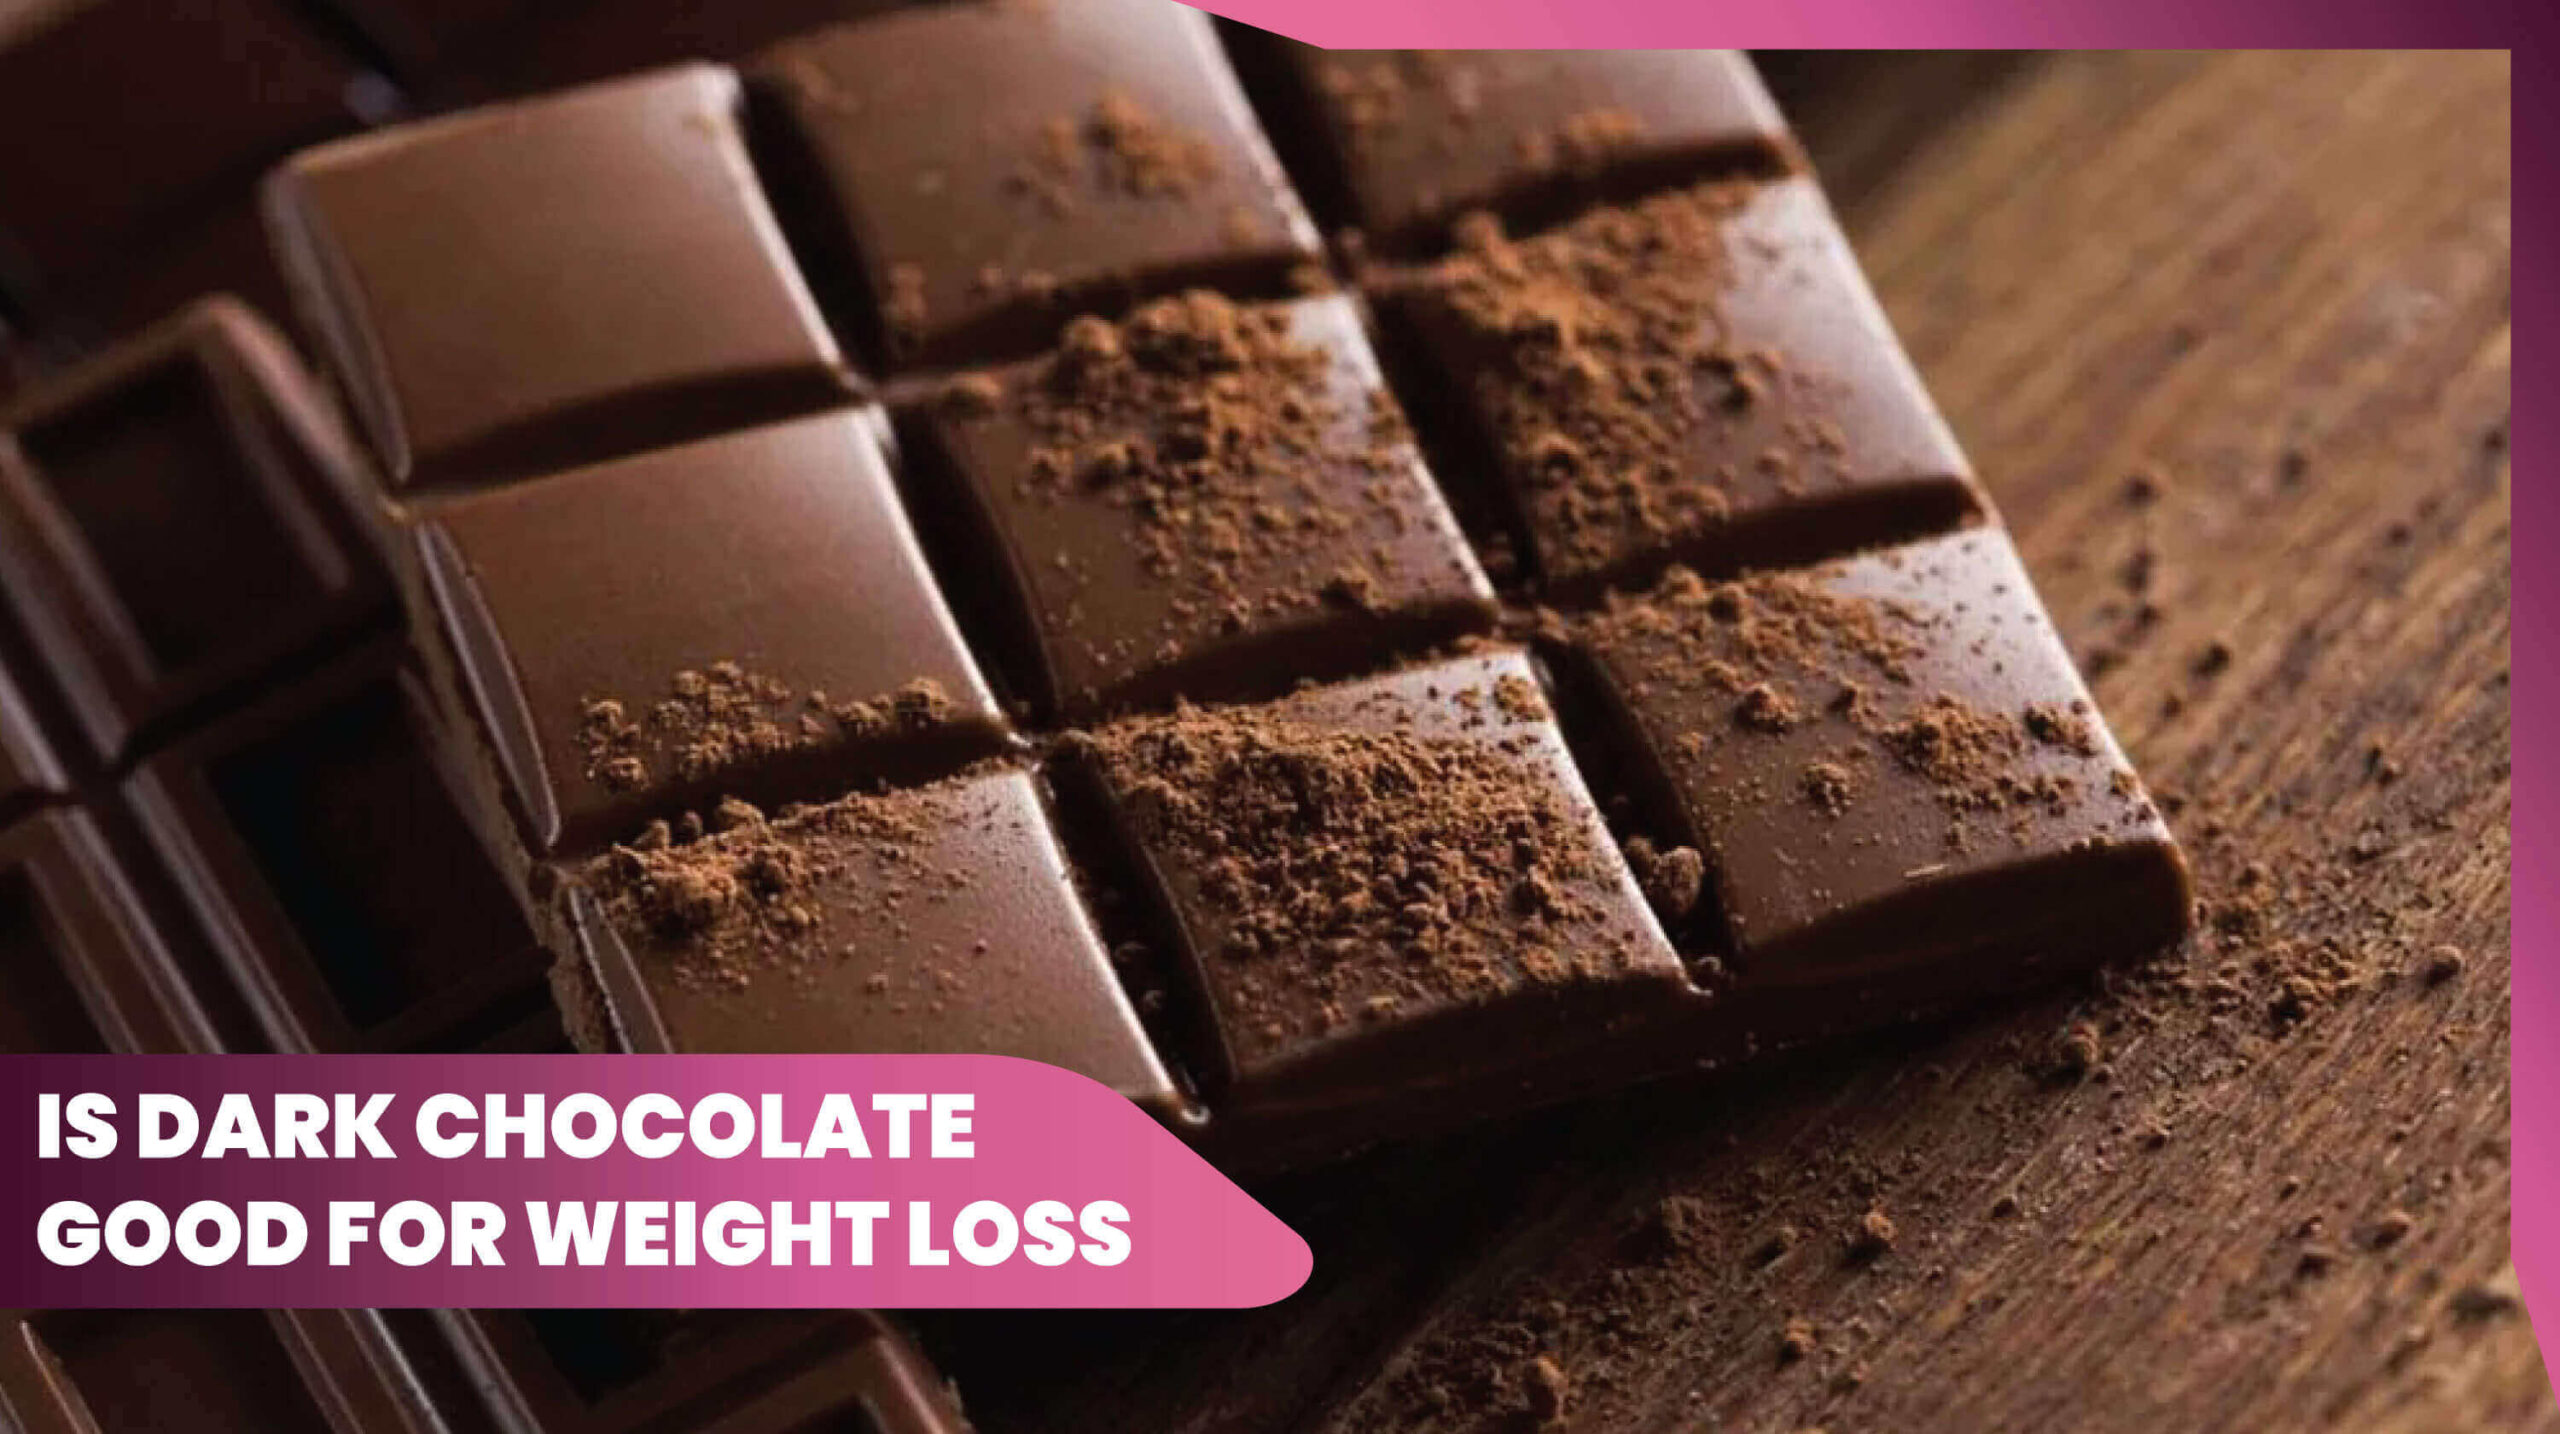 11is dark chocolate good for weight loss